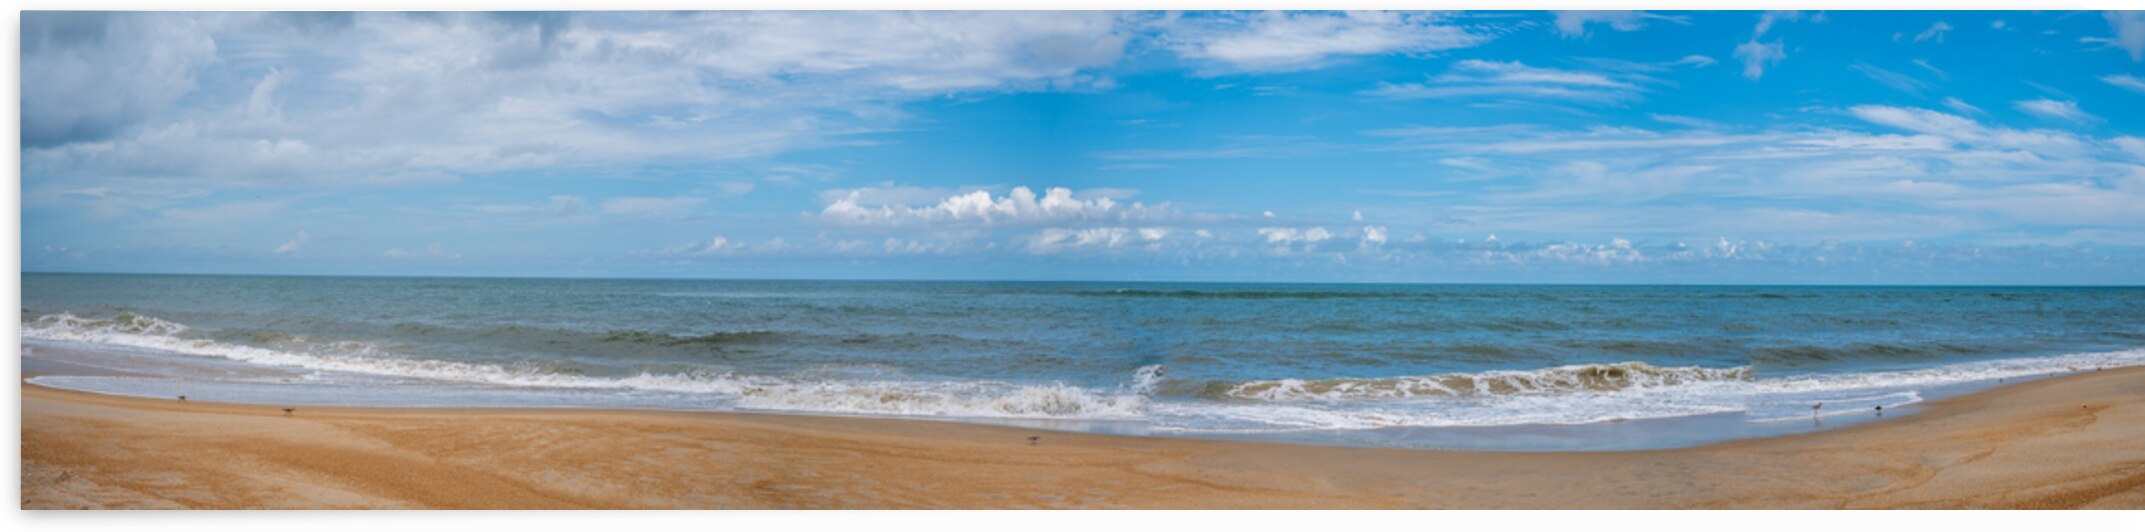 Ocean Pano by Dream World Images